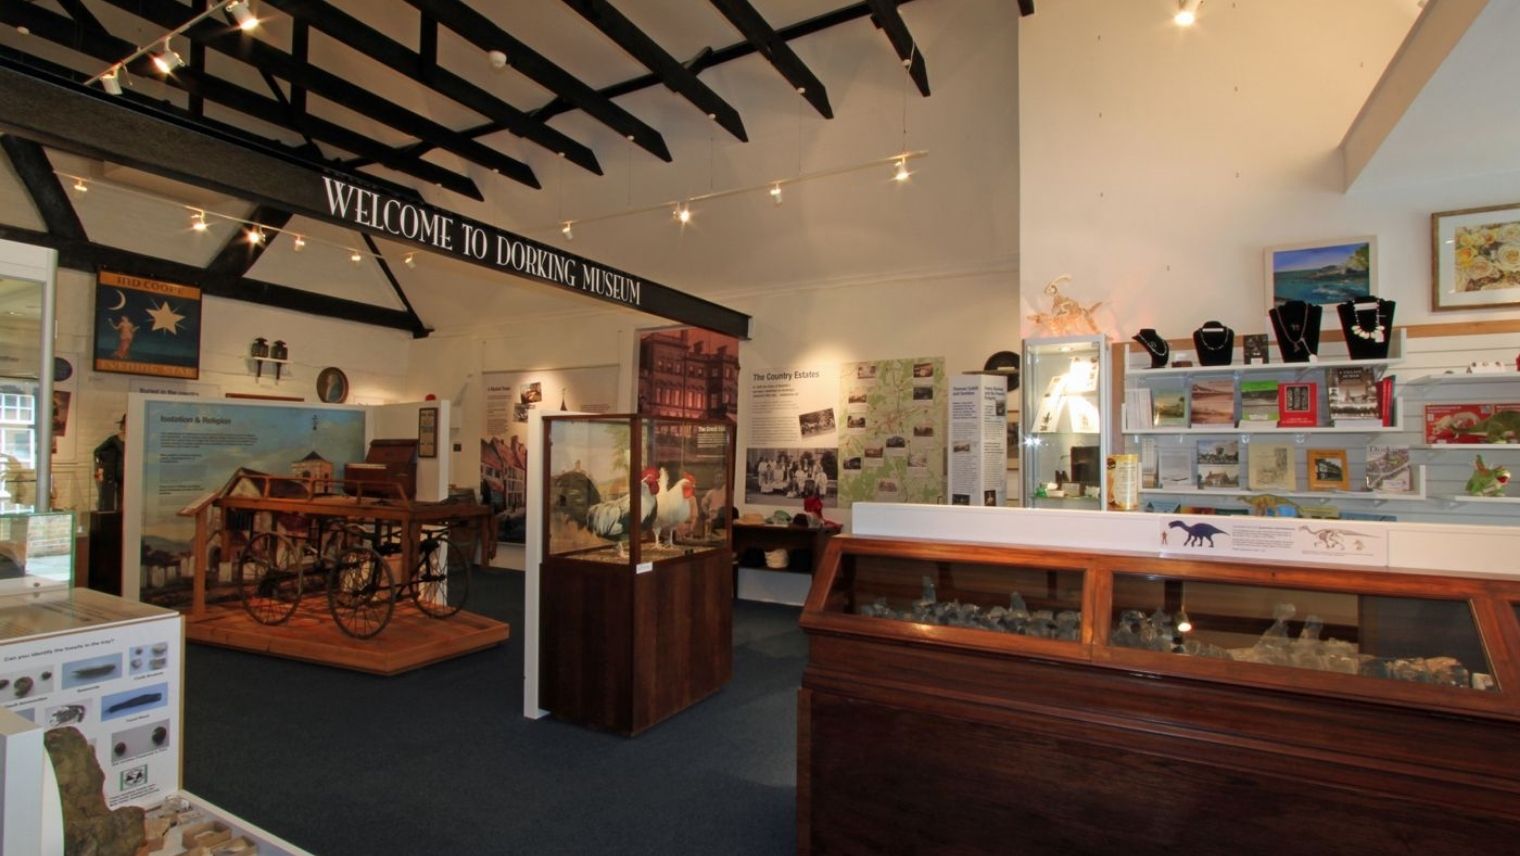 Exhibits at the Dorking Museum & Heritage Centre